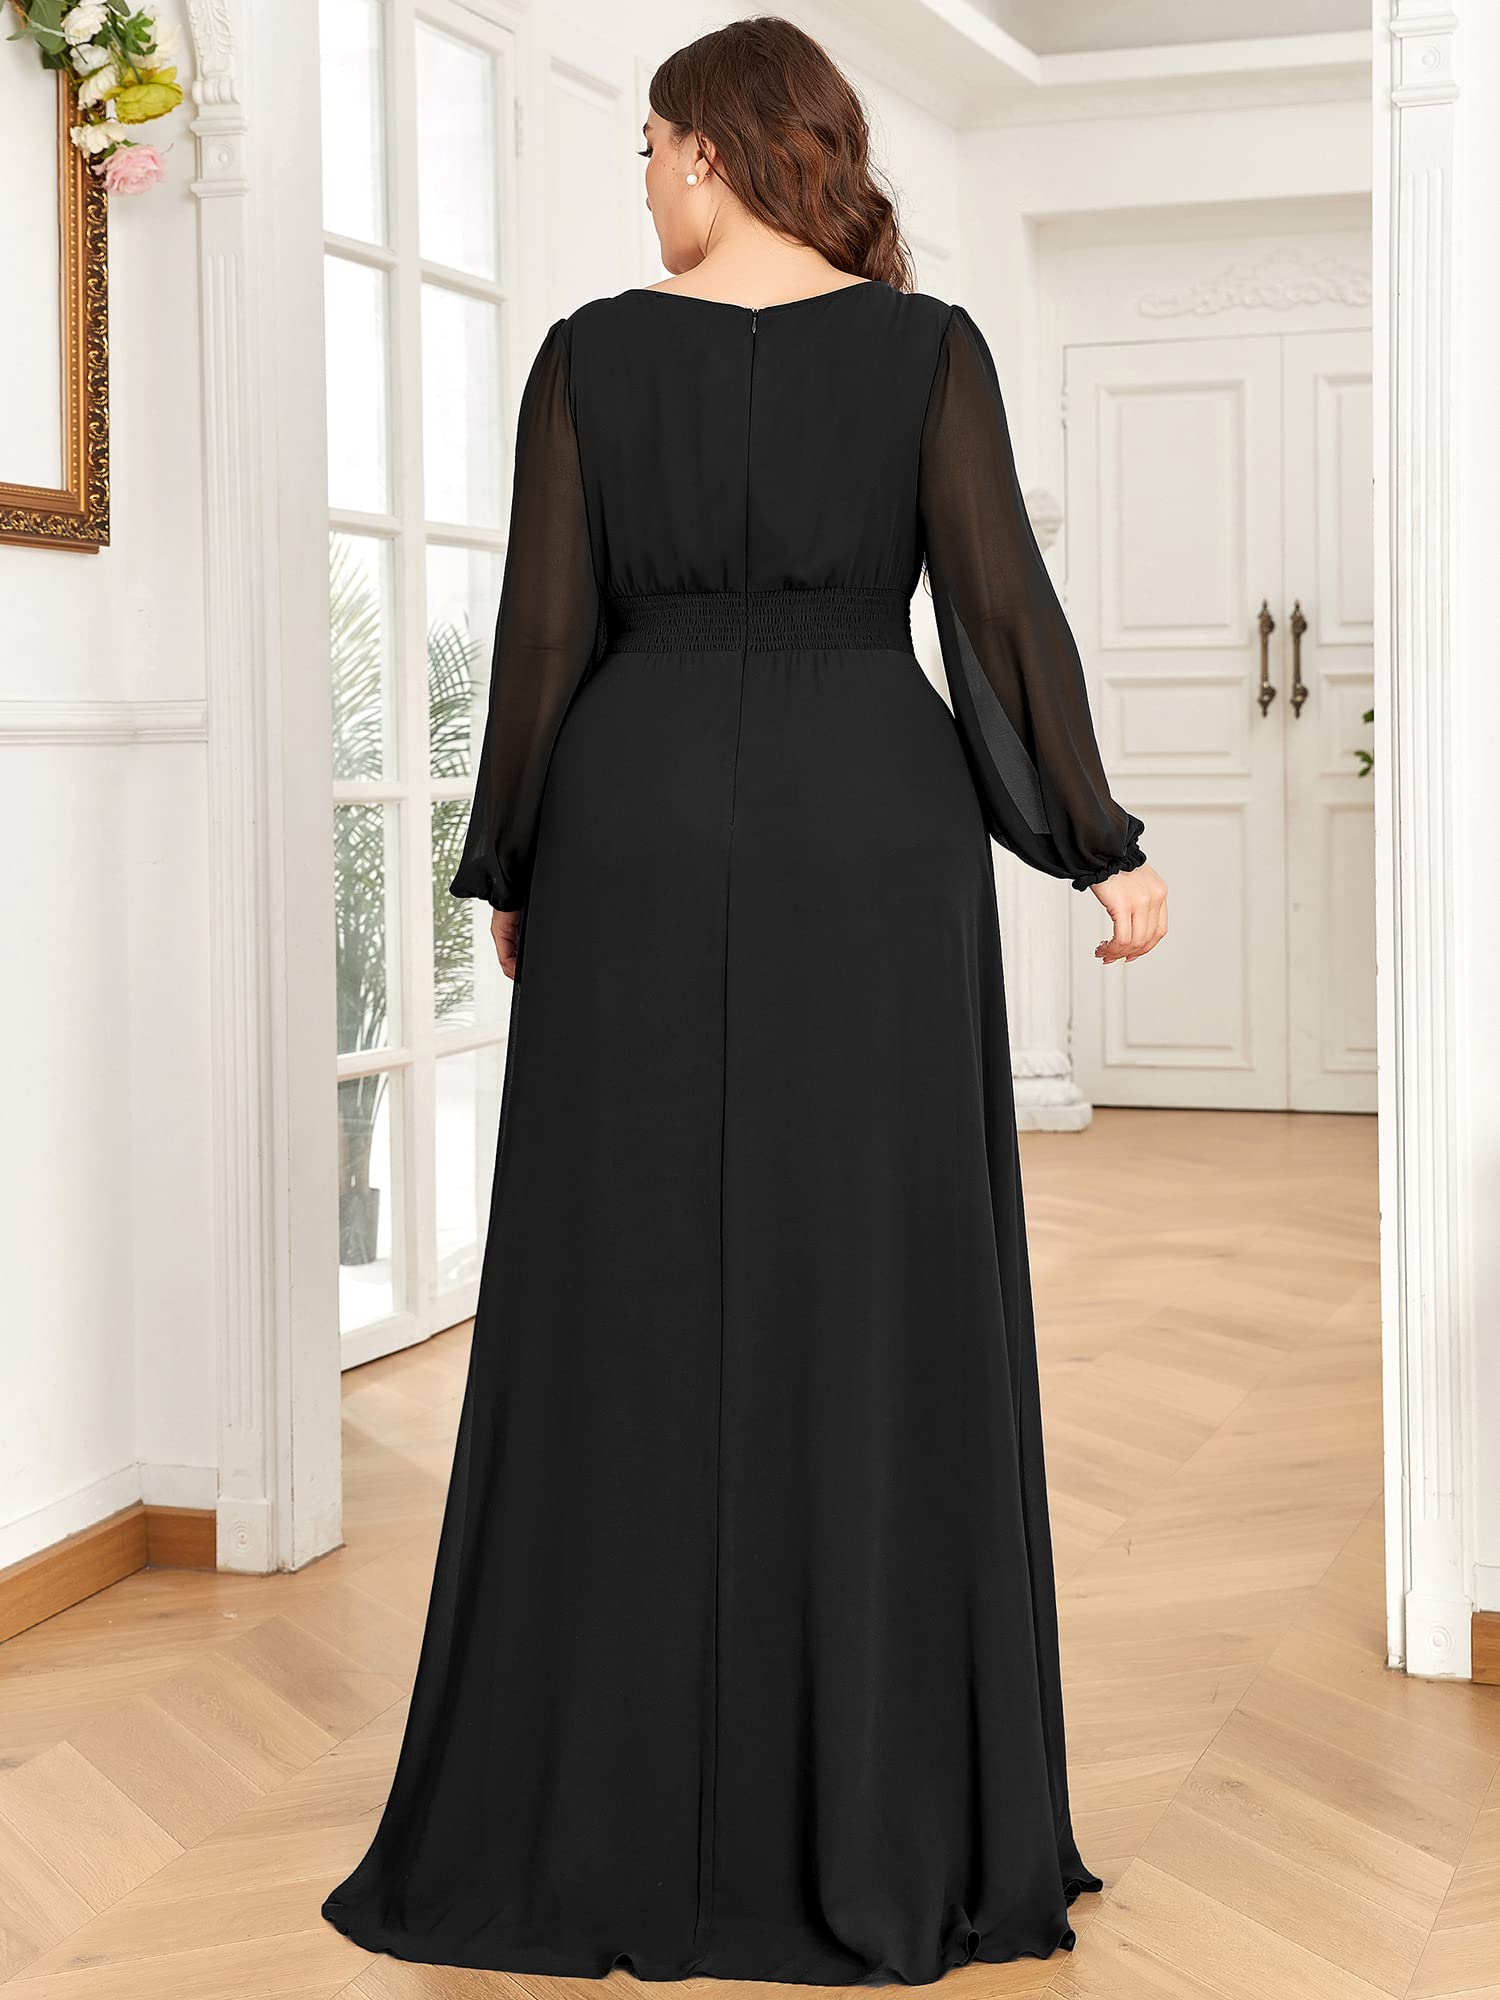 Ever-Pretty Women's Round Neck Long Lantern Sleeves Chiffon Pleated Long Evening Gown Plus Size Formal Dress Black US22